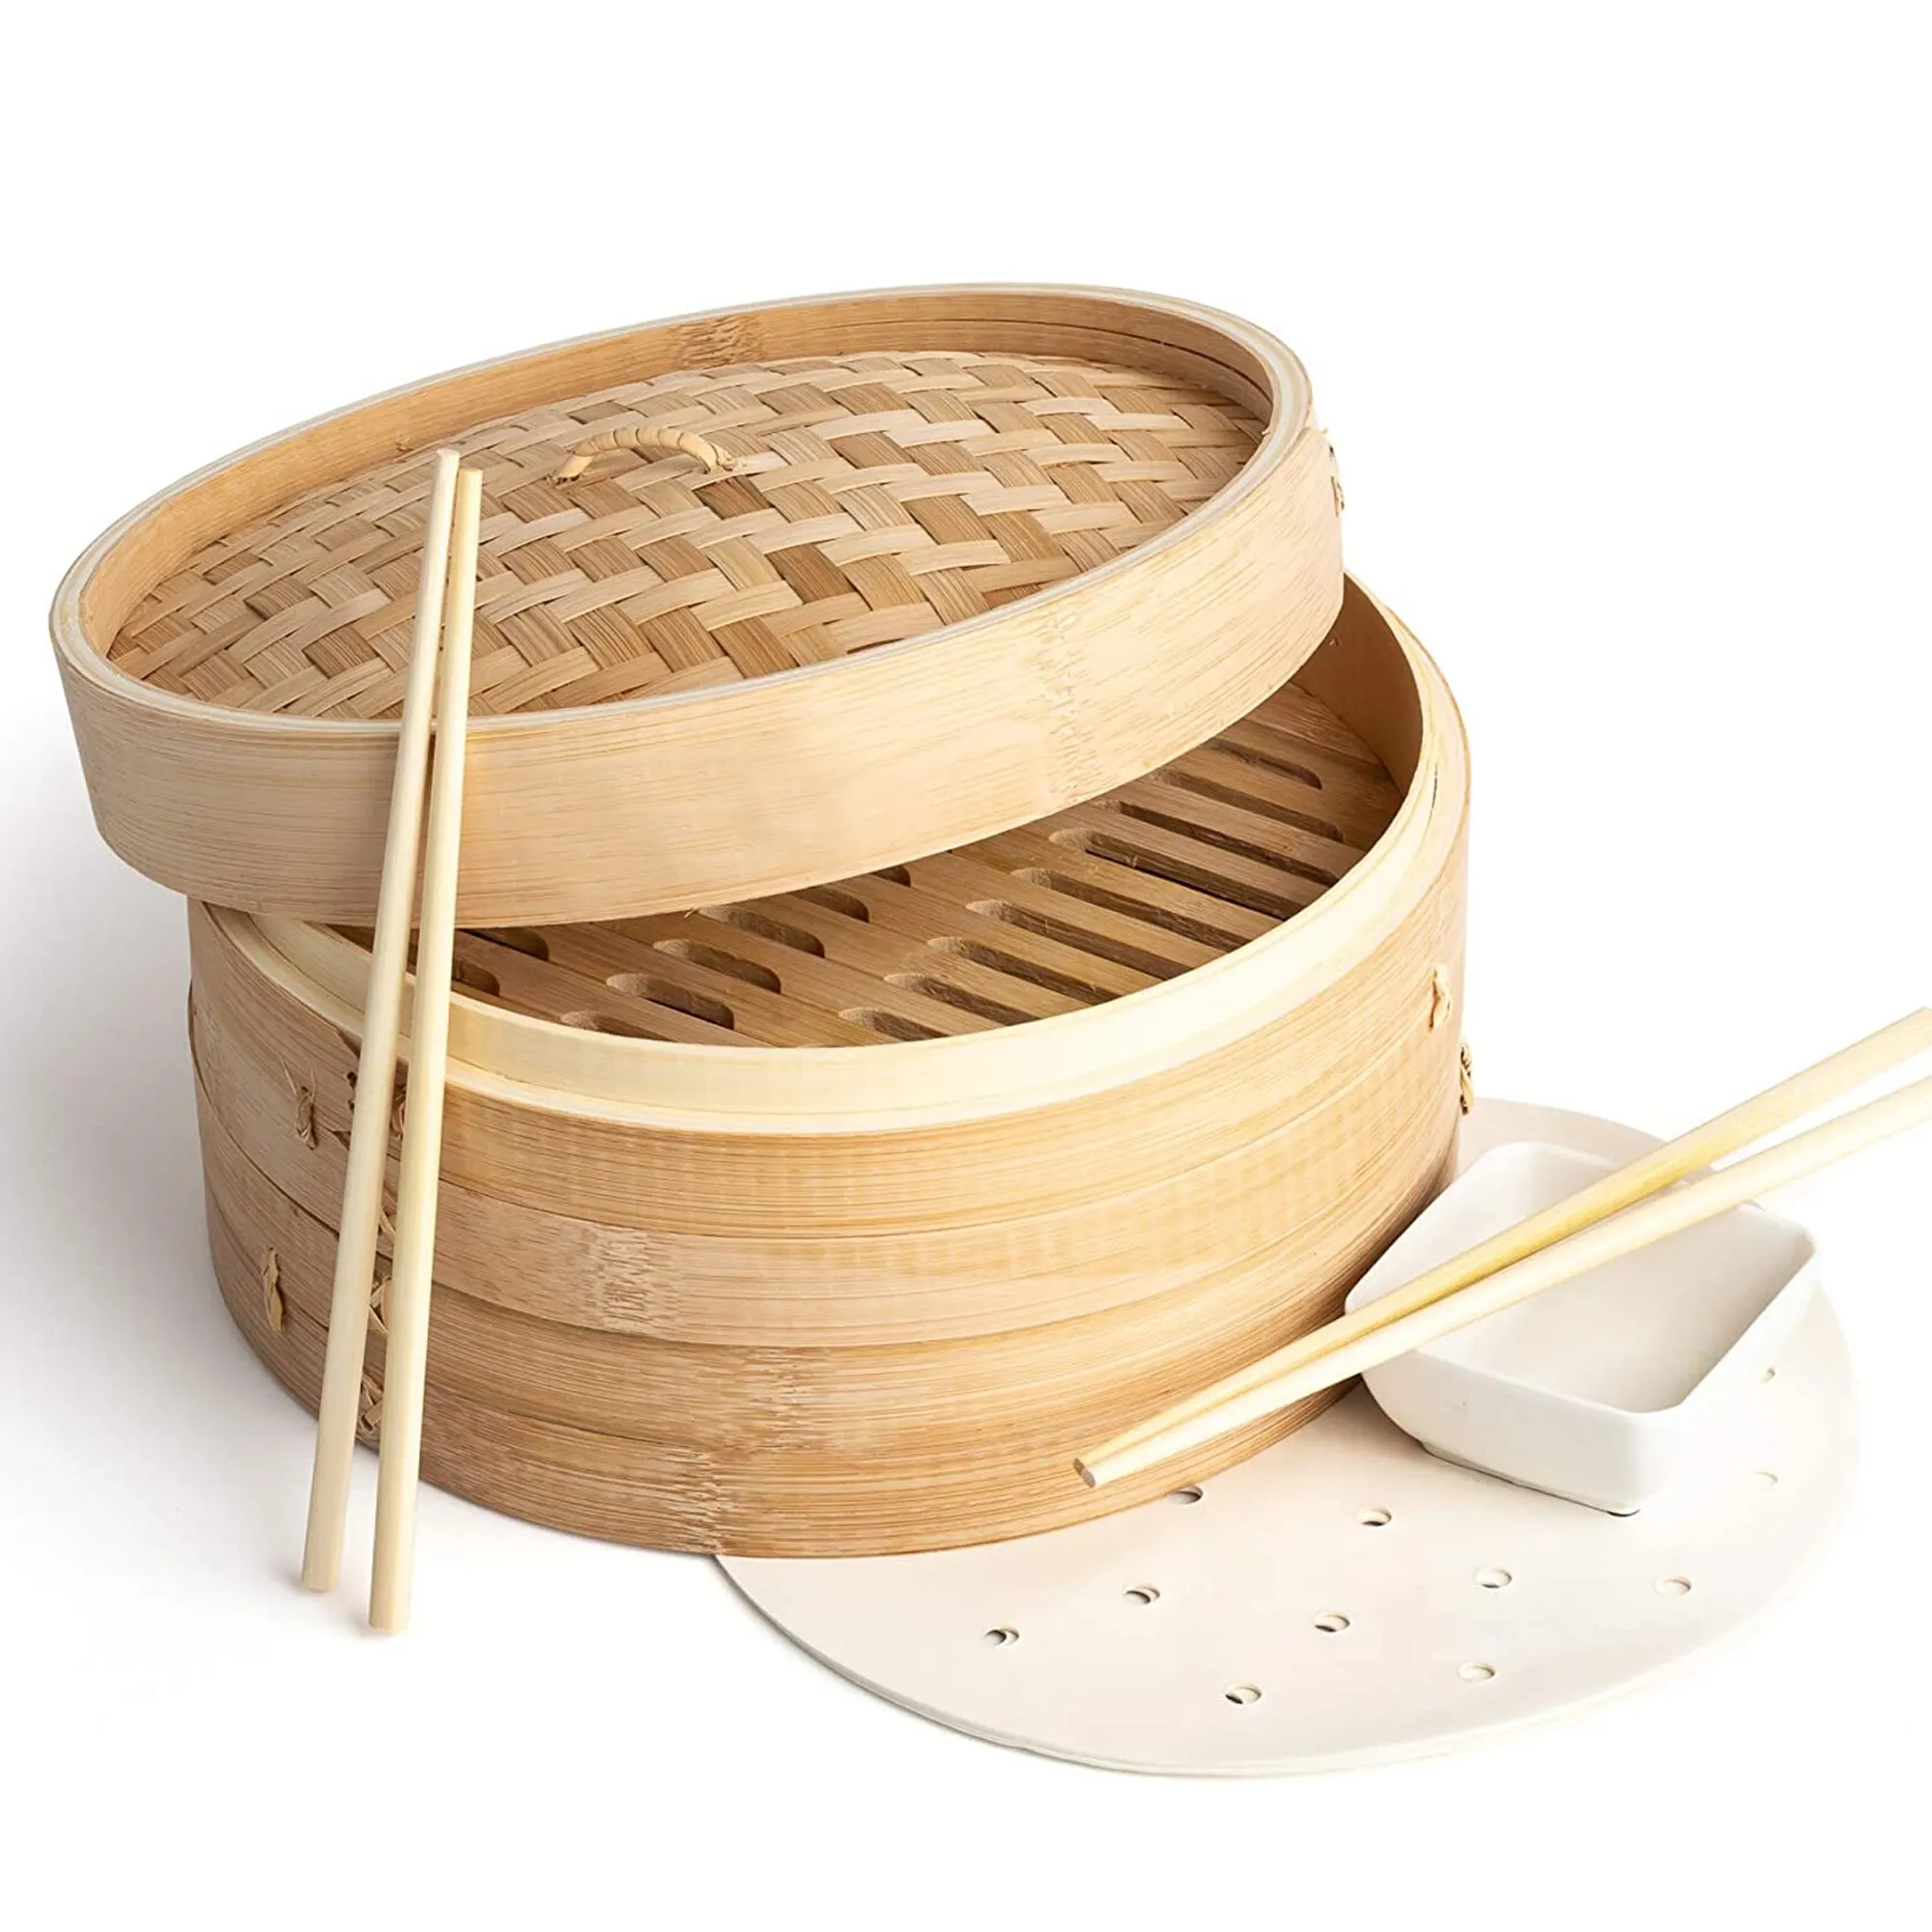 2021 Hot Sale 100% Organic 2 Tier Bamboo Steamer Basket for Cooking